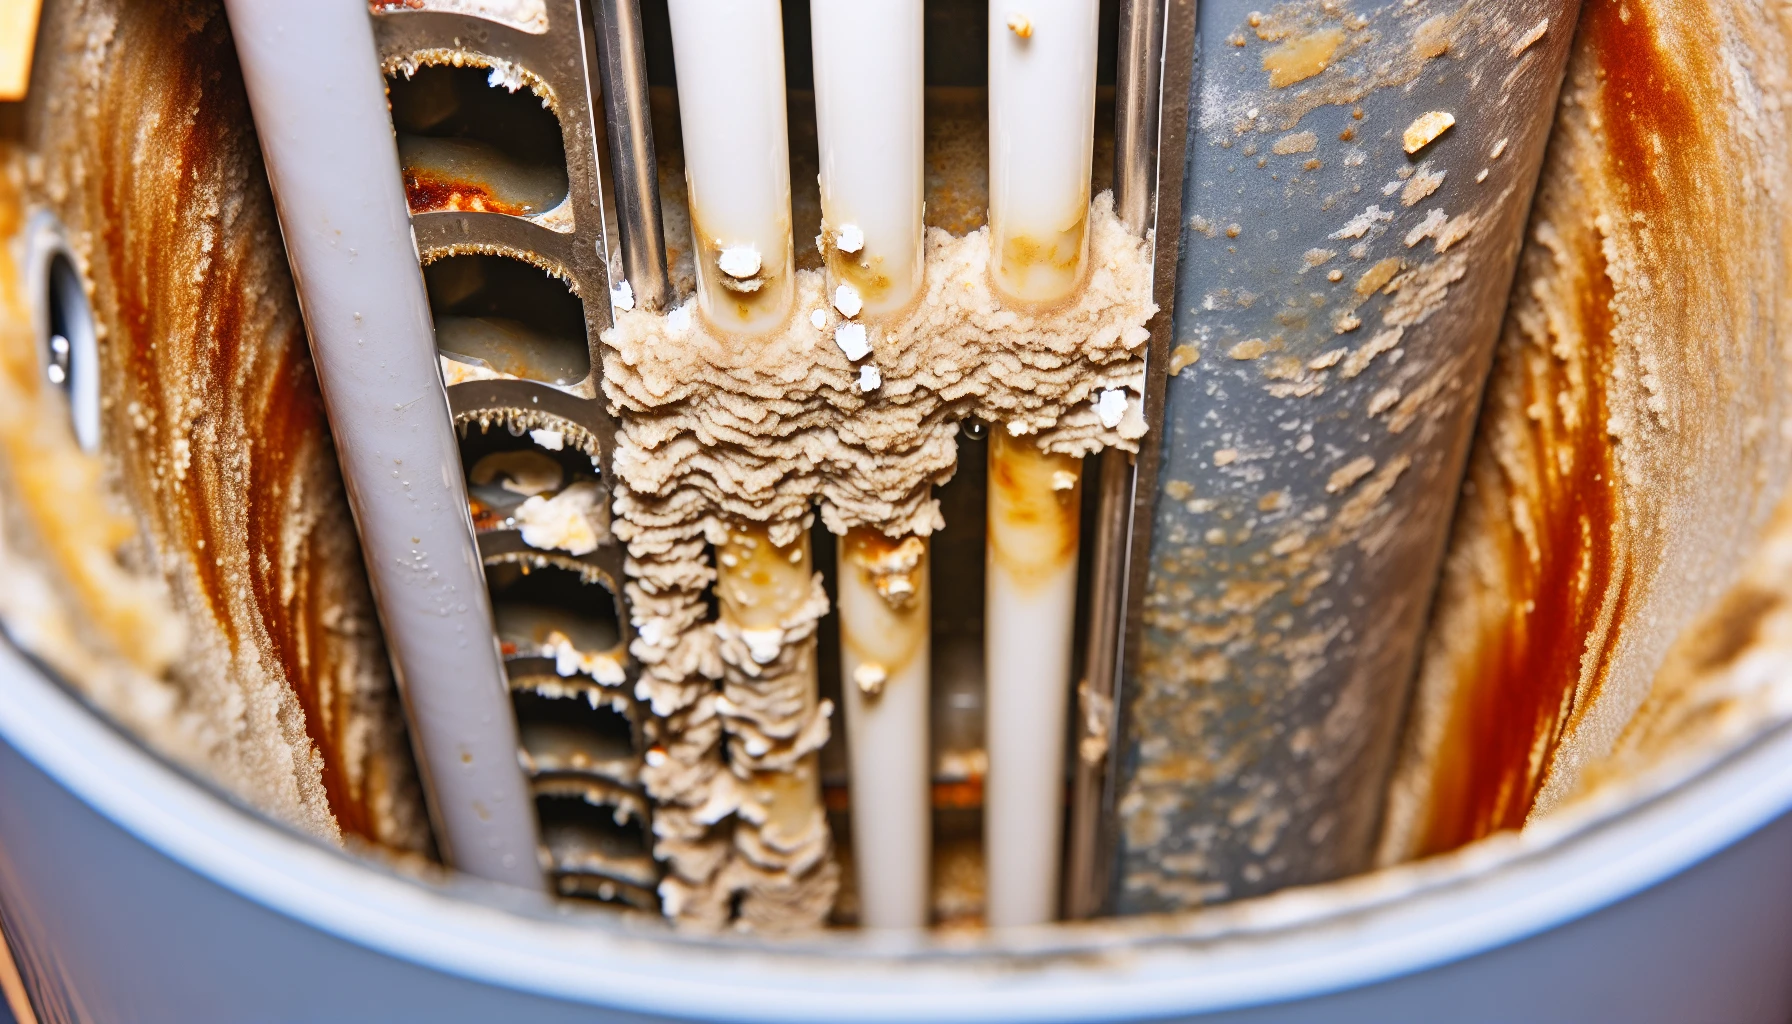 A close-up of a water heater with visible sediment buildup and mineral deposits